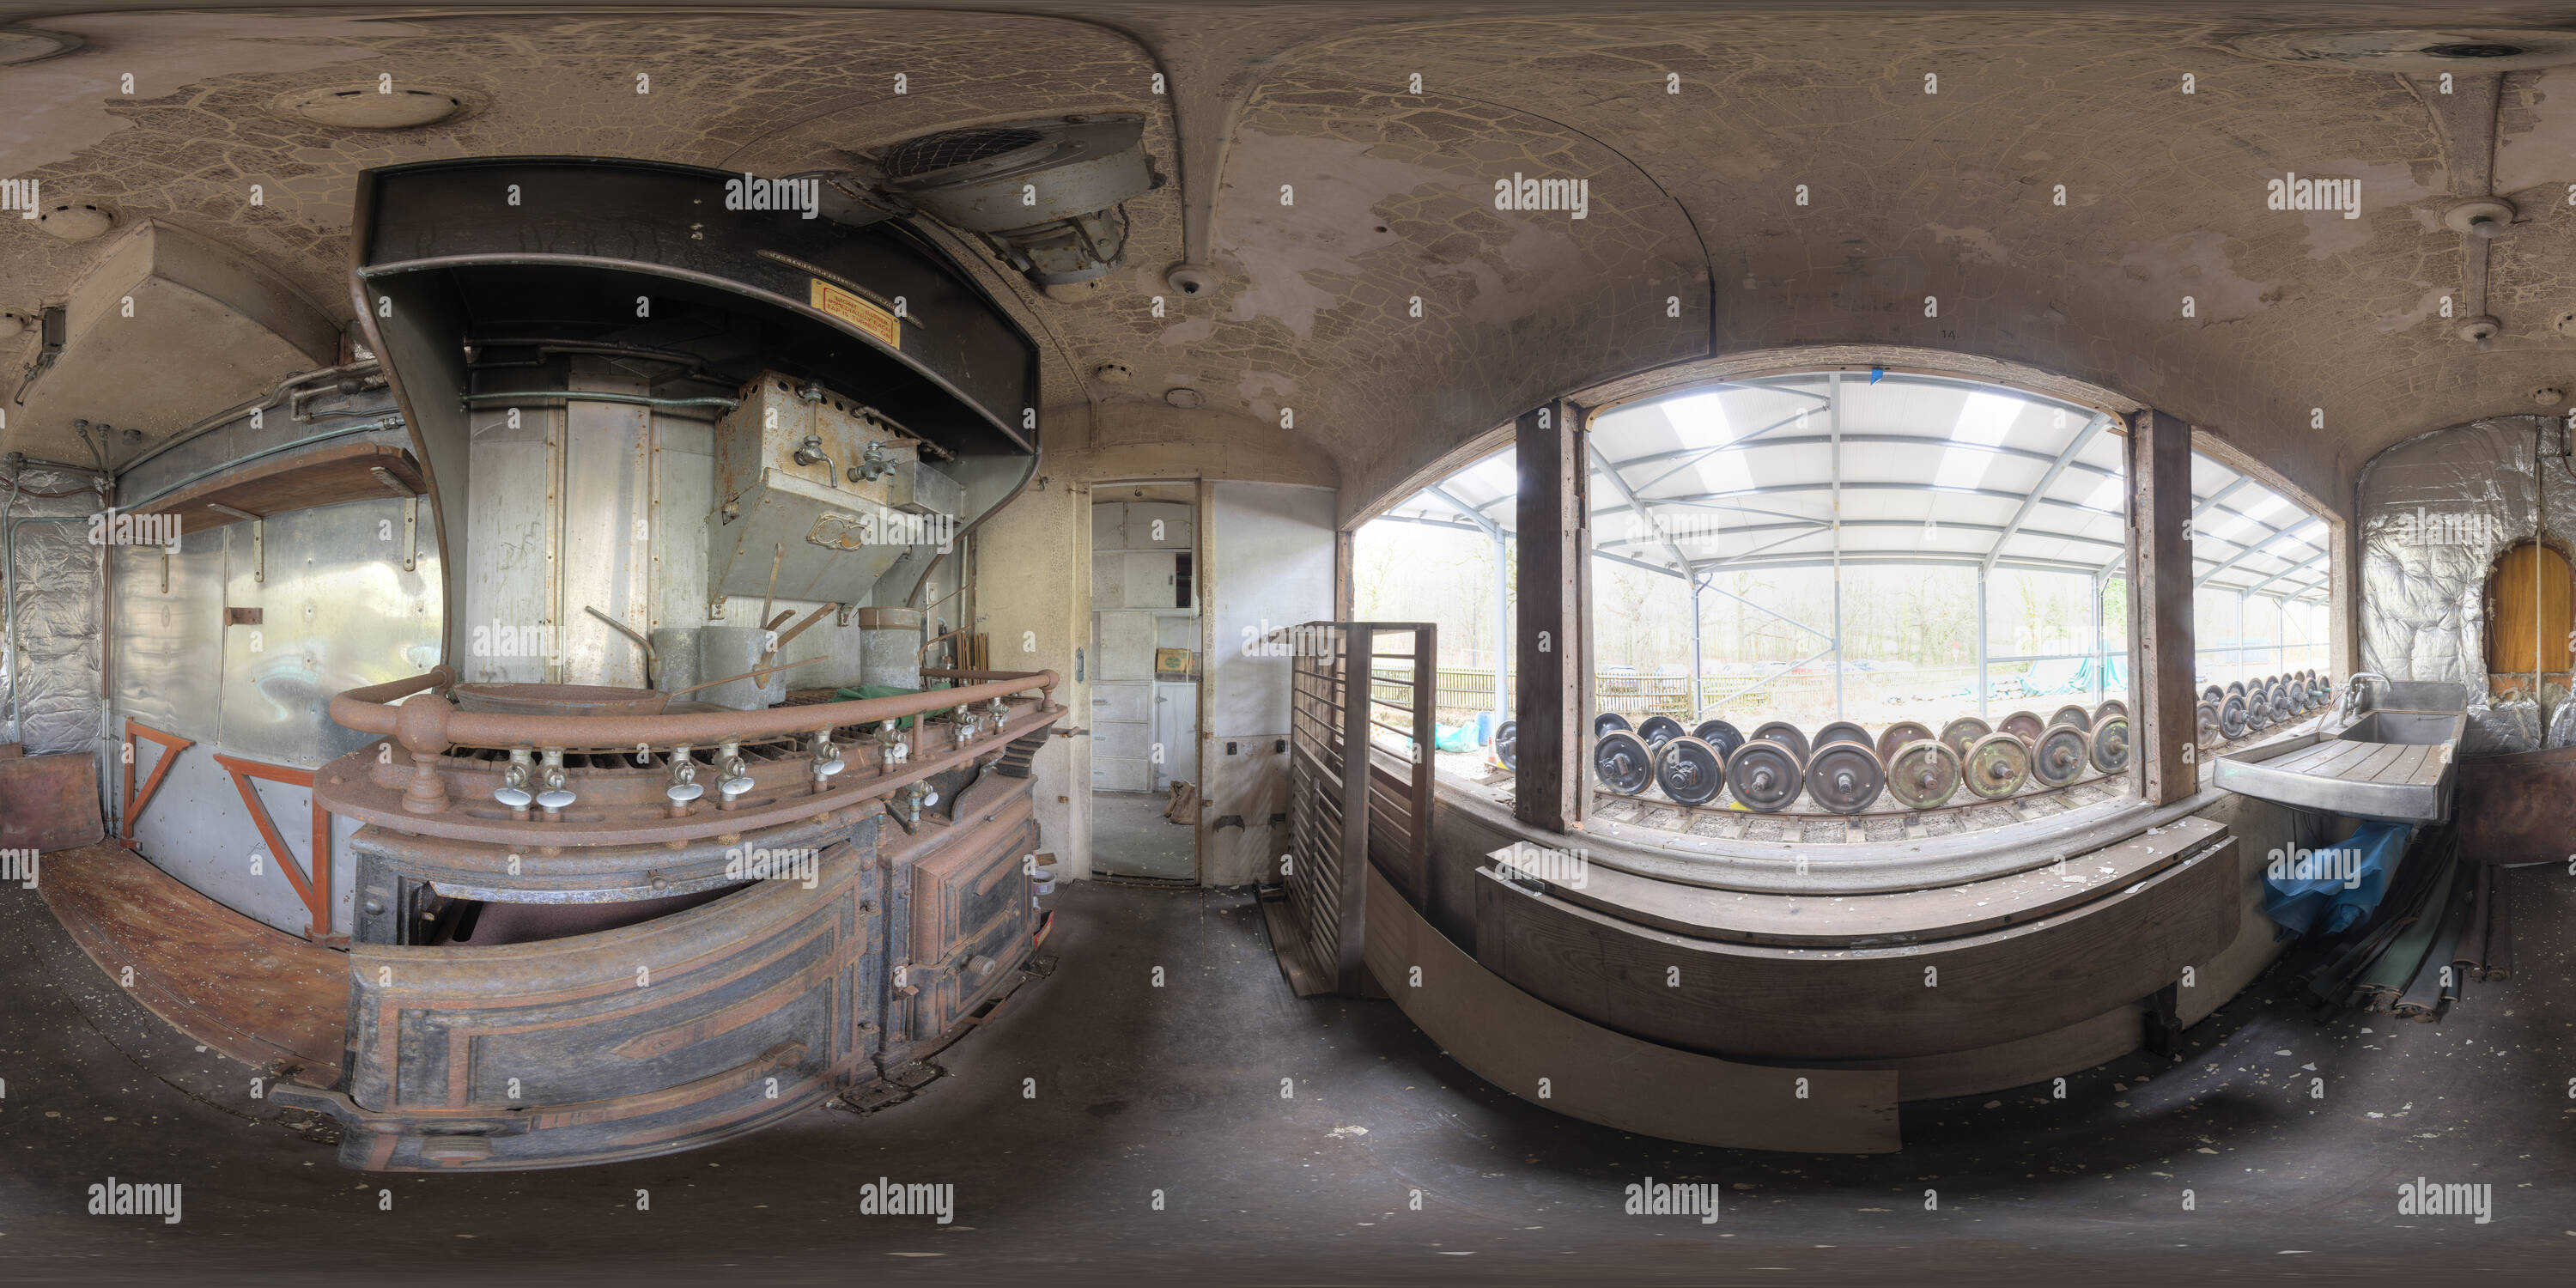 360 degree panoramic view of LB&amp;SCR Directors' Saloon (kitchen)